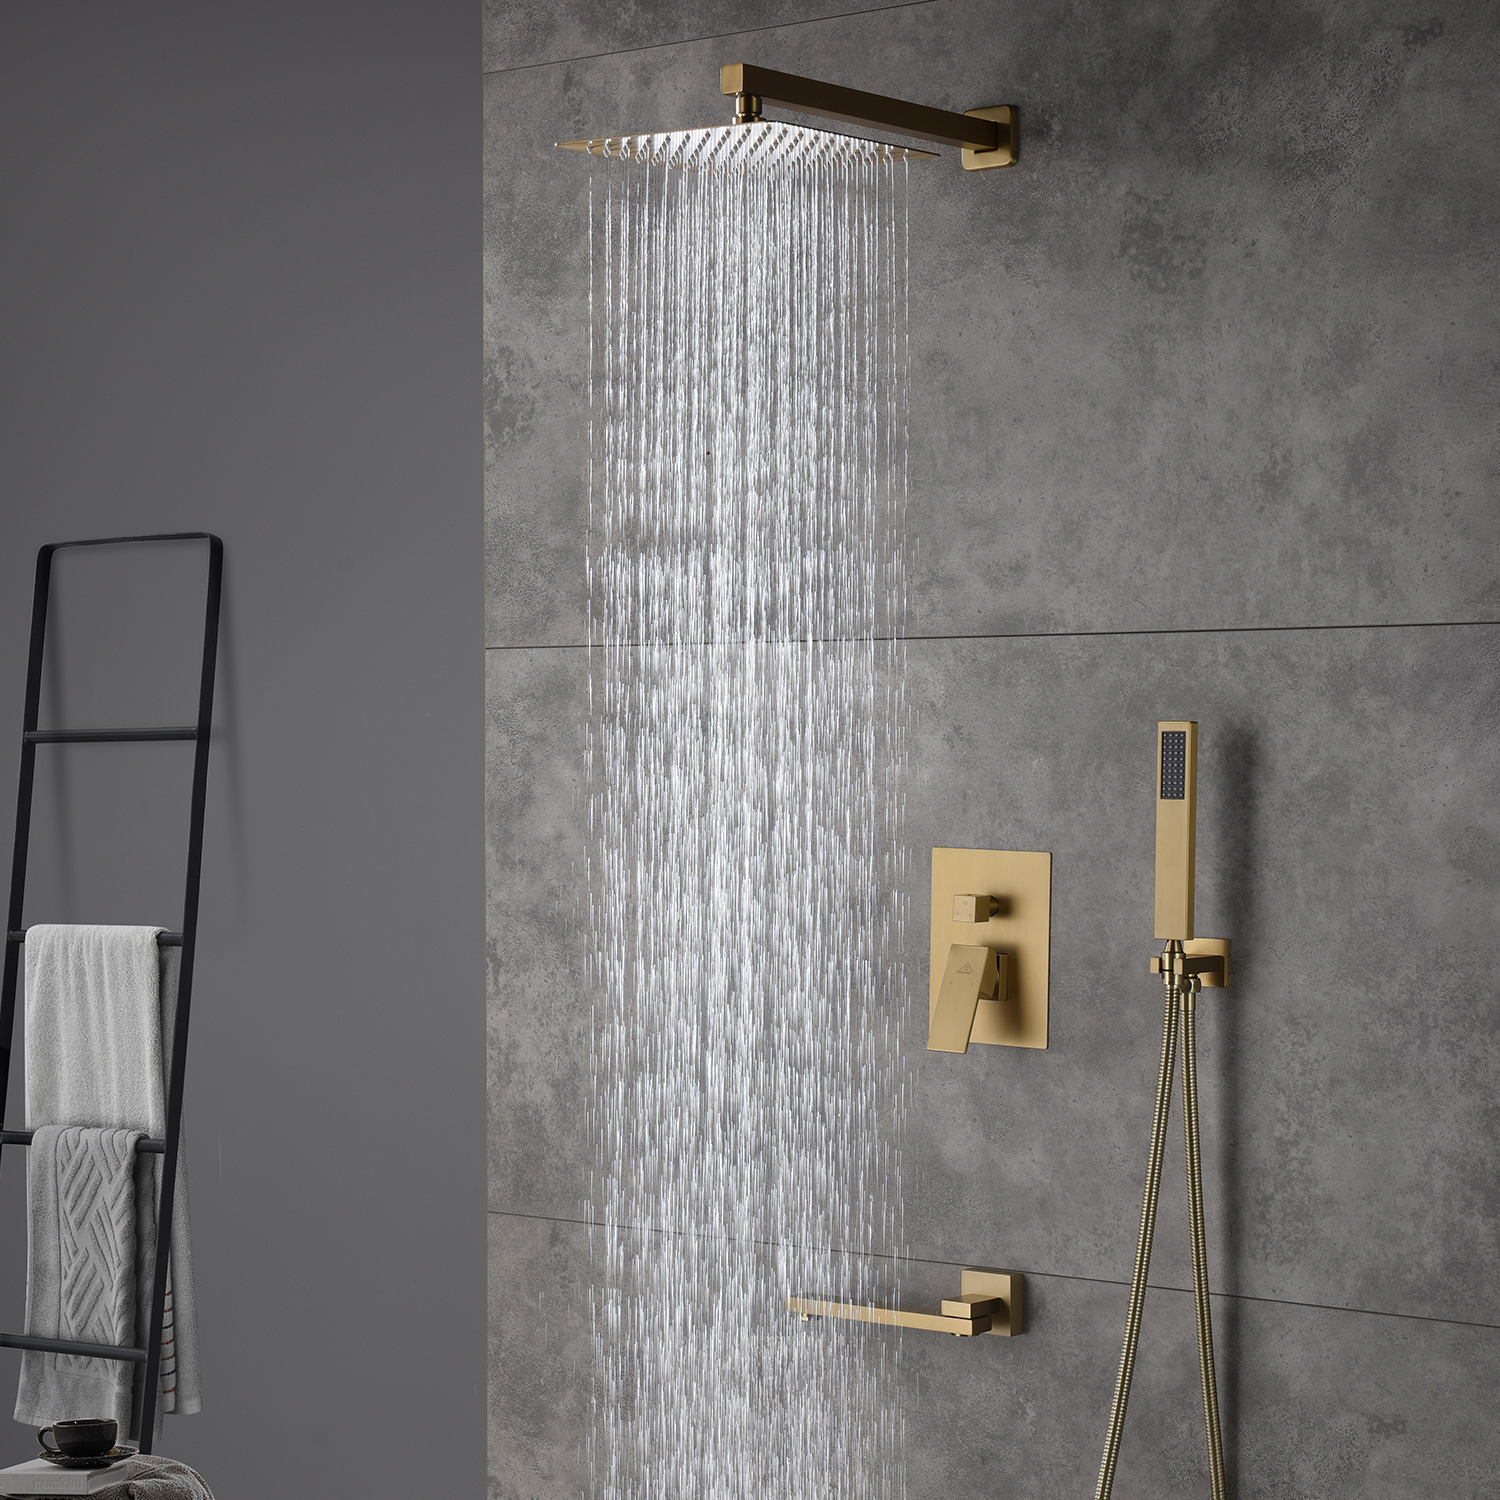 Casainc 3 Function 10" Wall Mounted Dual Shower Heads Shower System In Brush Gold-CASAINC